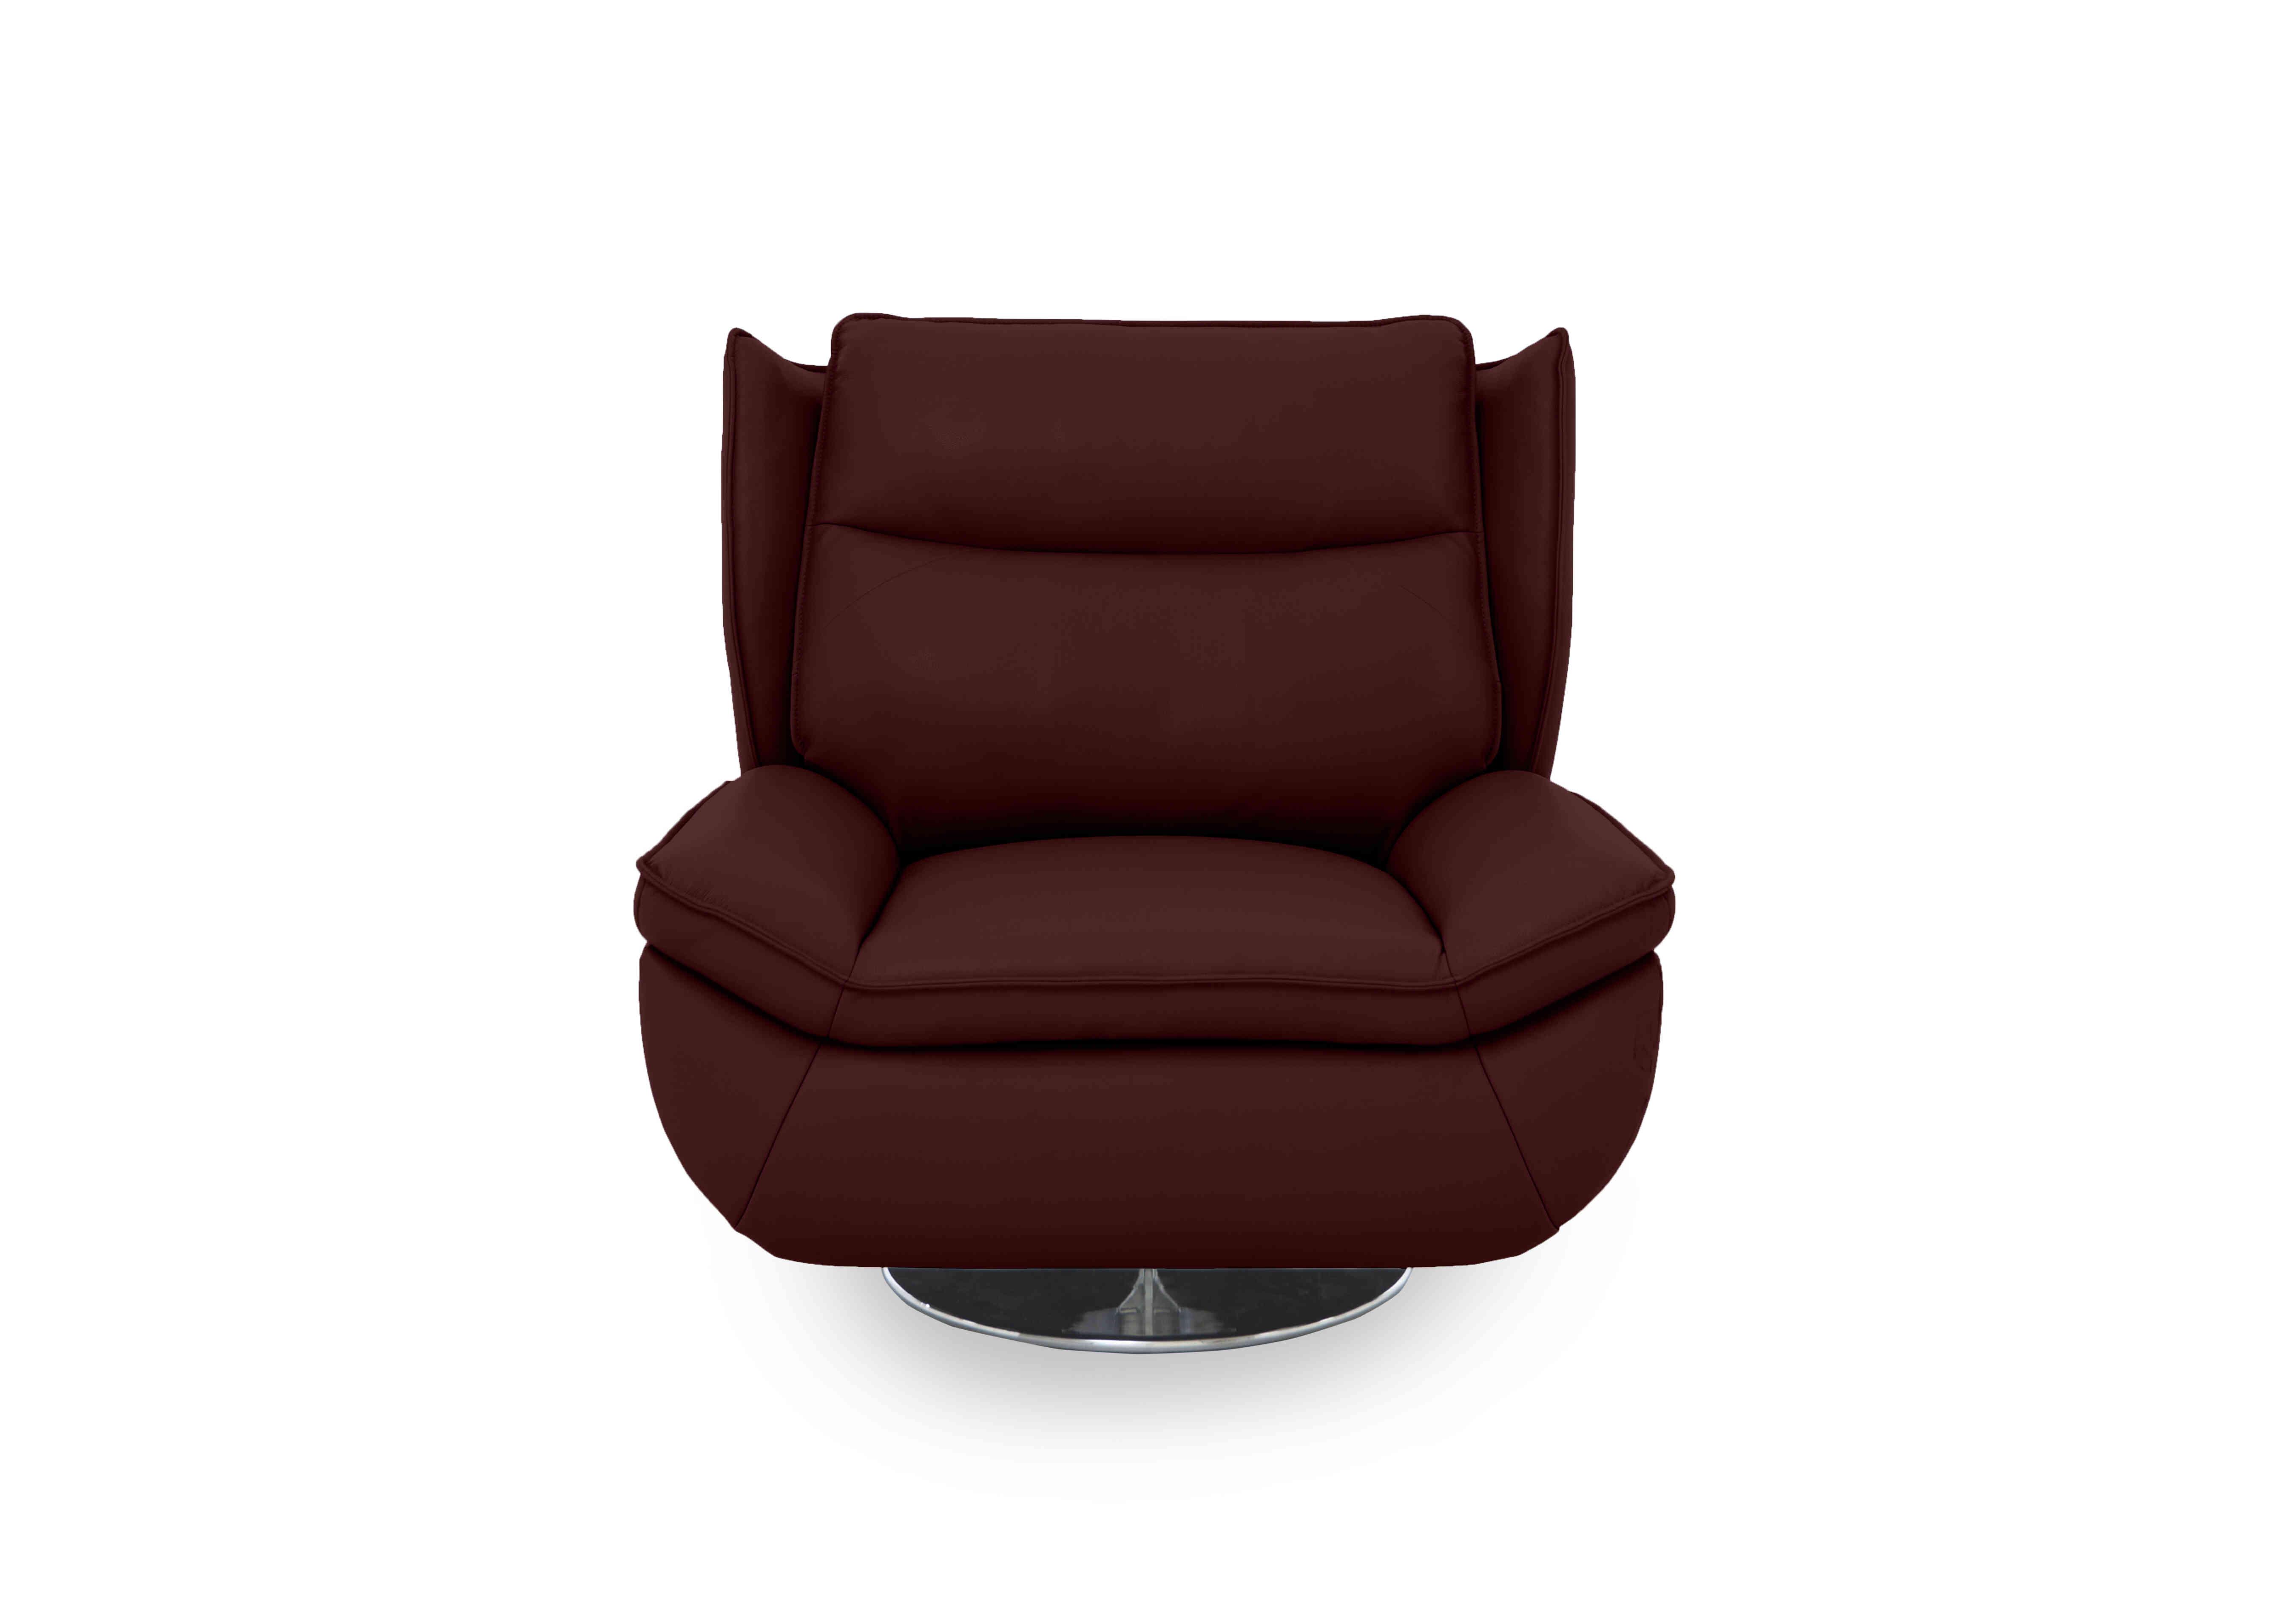 Vinny Leather Swivel Chair in Cat-60/15 Ruby on Furniture Village